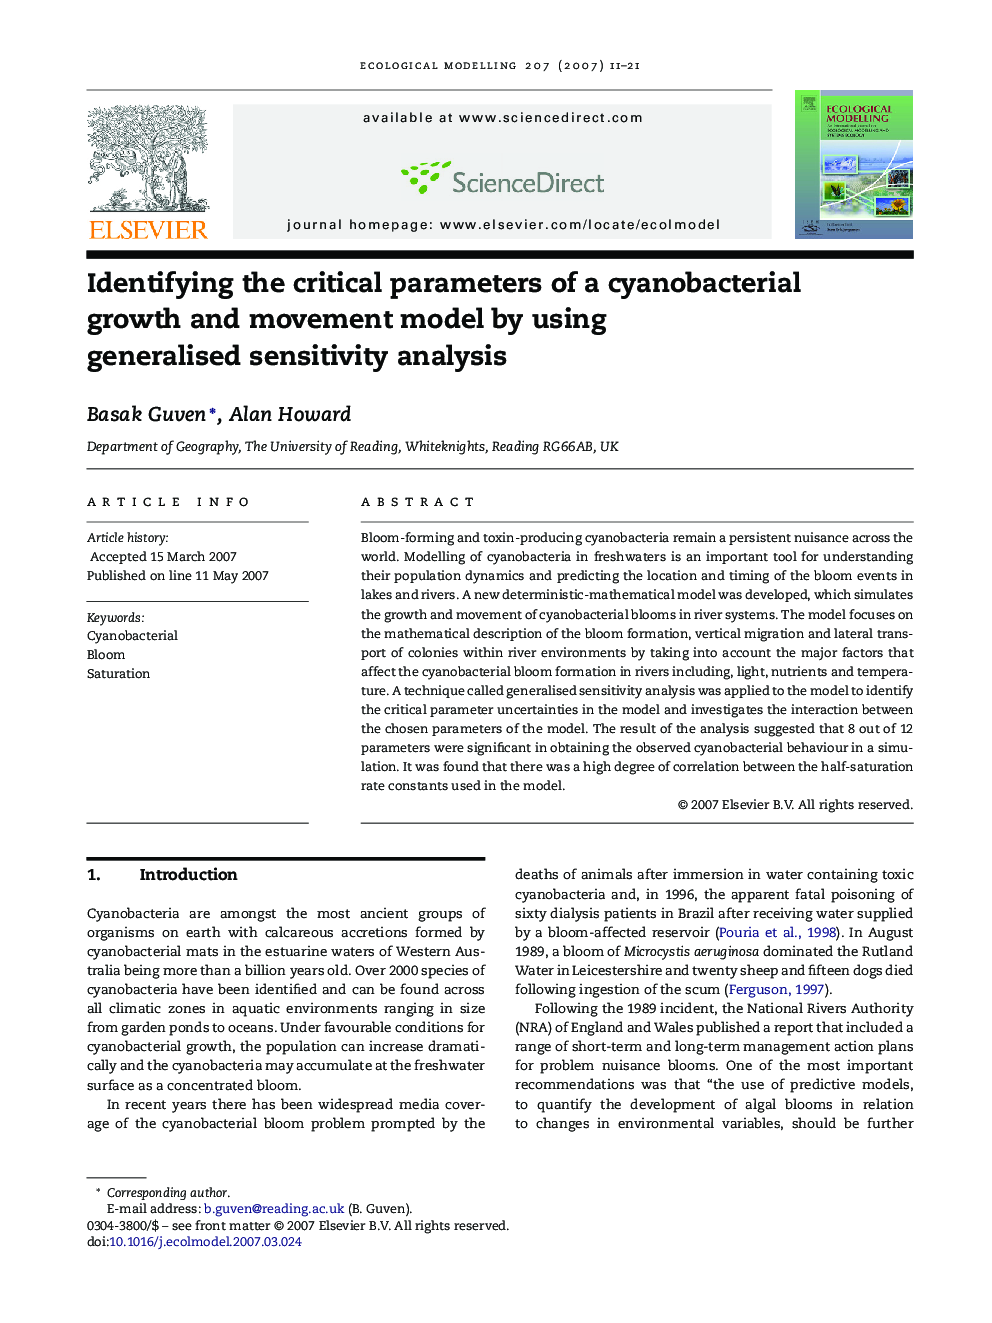 Identifying the critical parameters of a cyanobacterial growth and movement model by using generalised sensitivity analysis